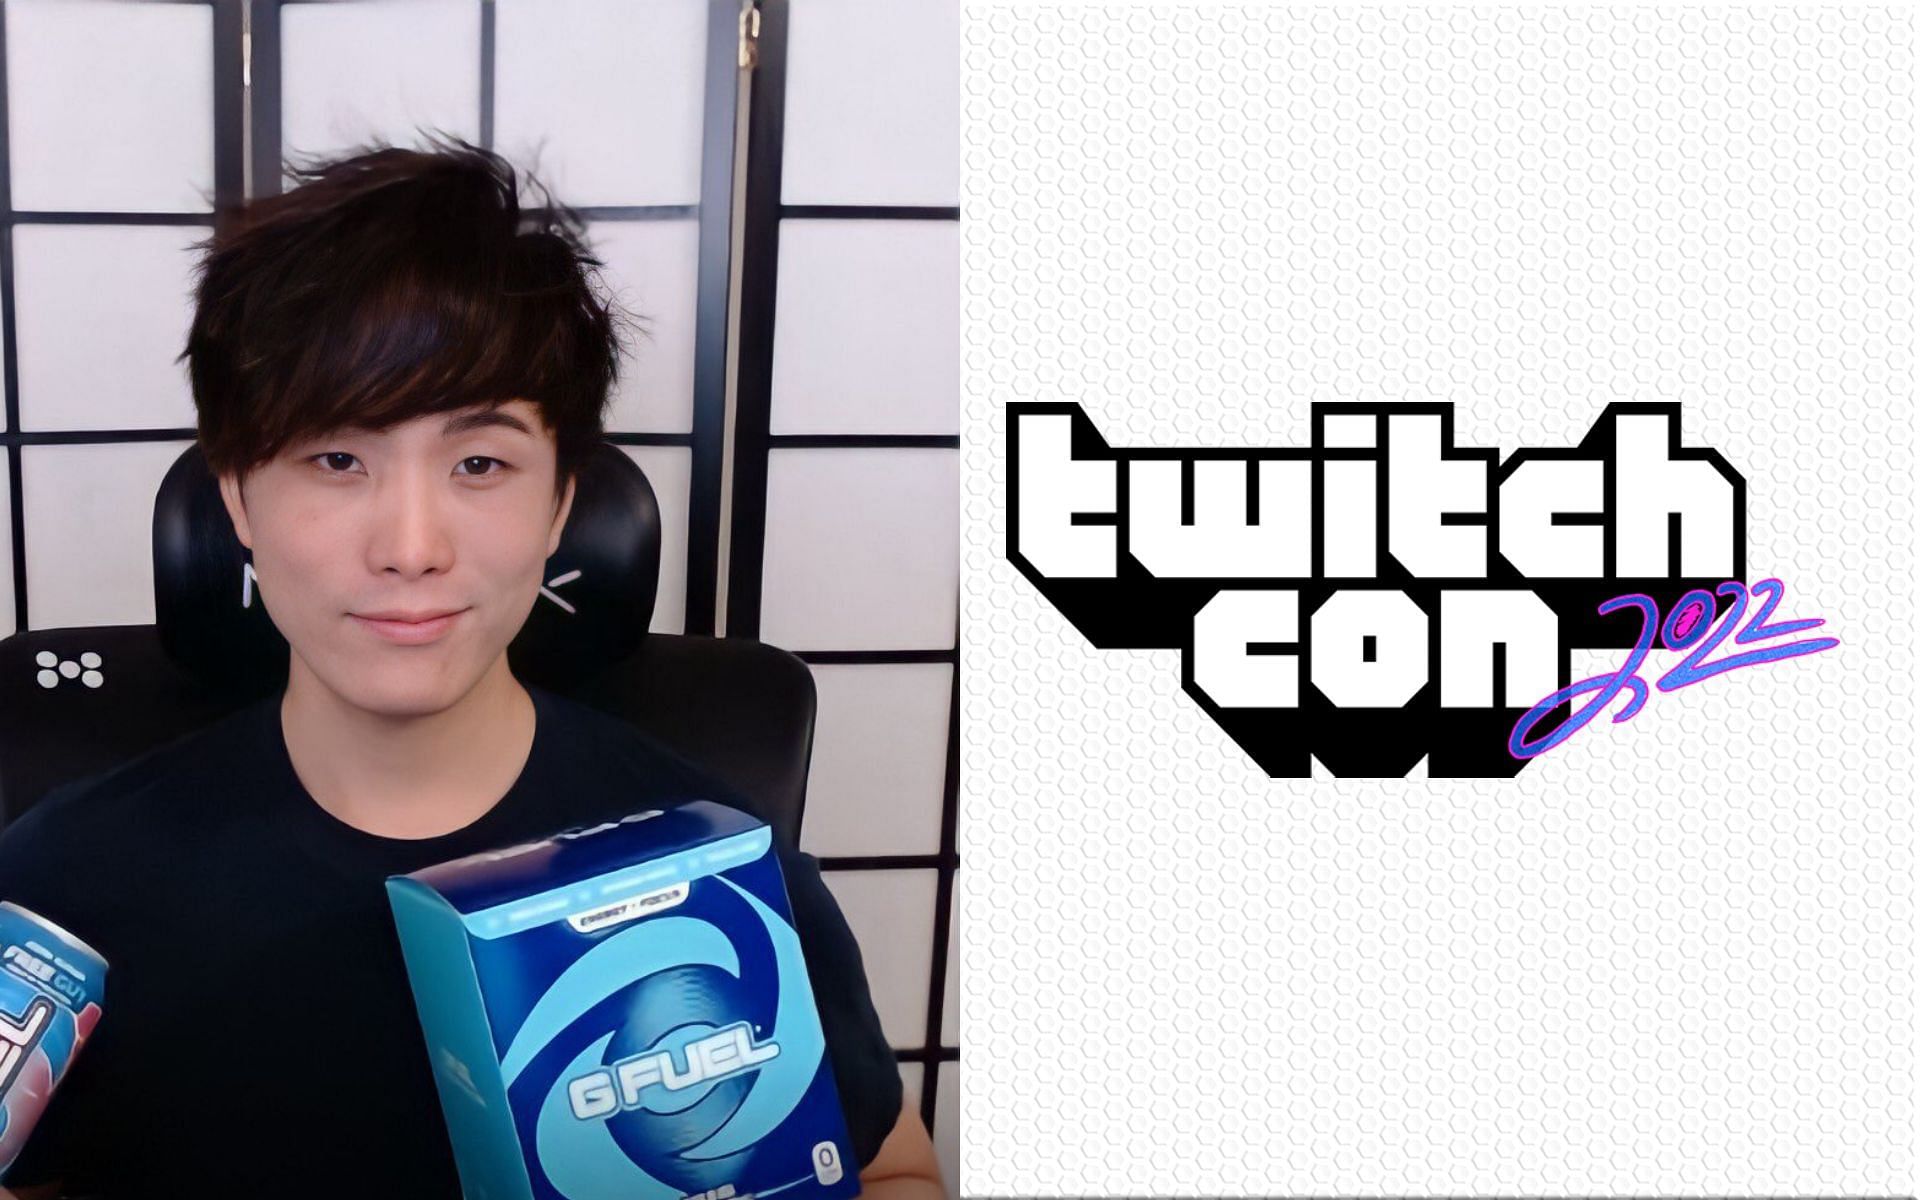 Sykkuno explains why he might not attend the upcoming TwitchCon 2022 (Image via Sportskeeda)